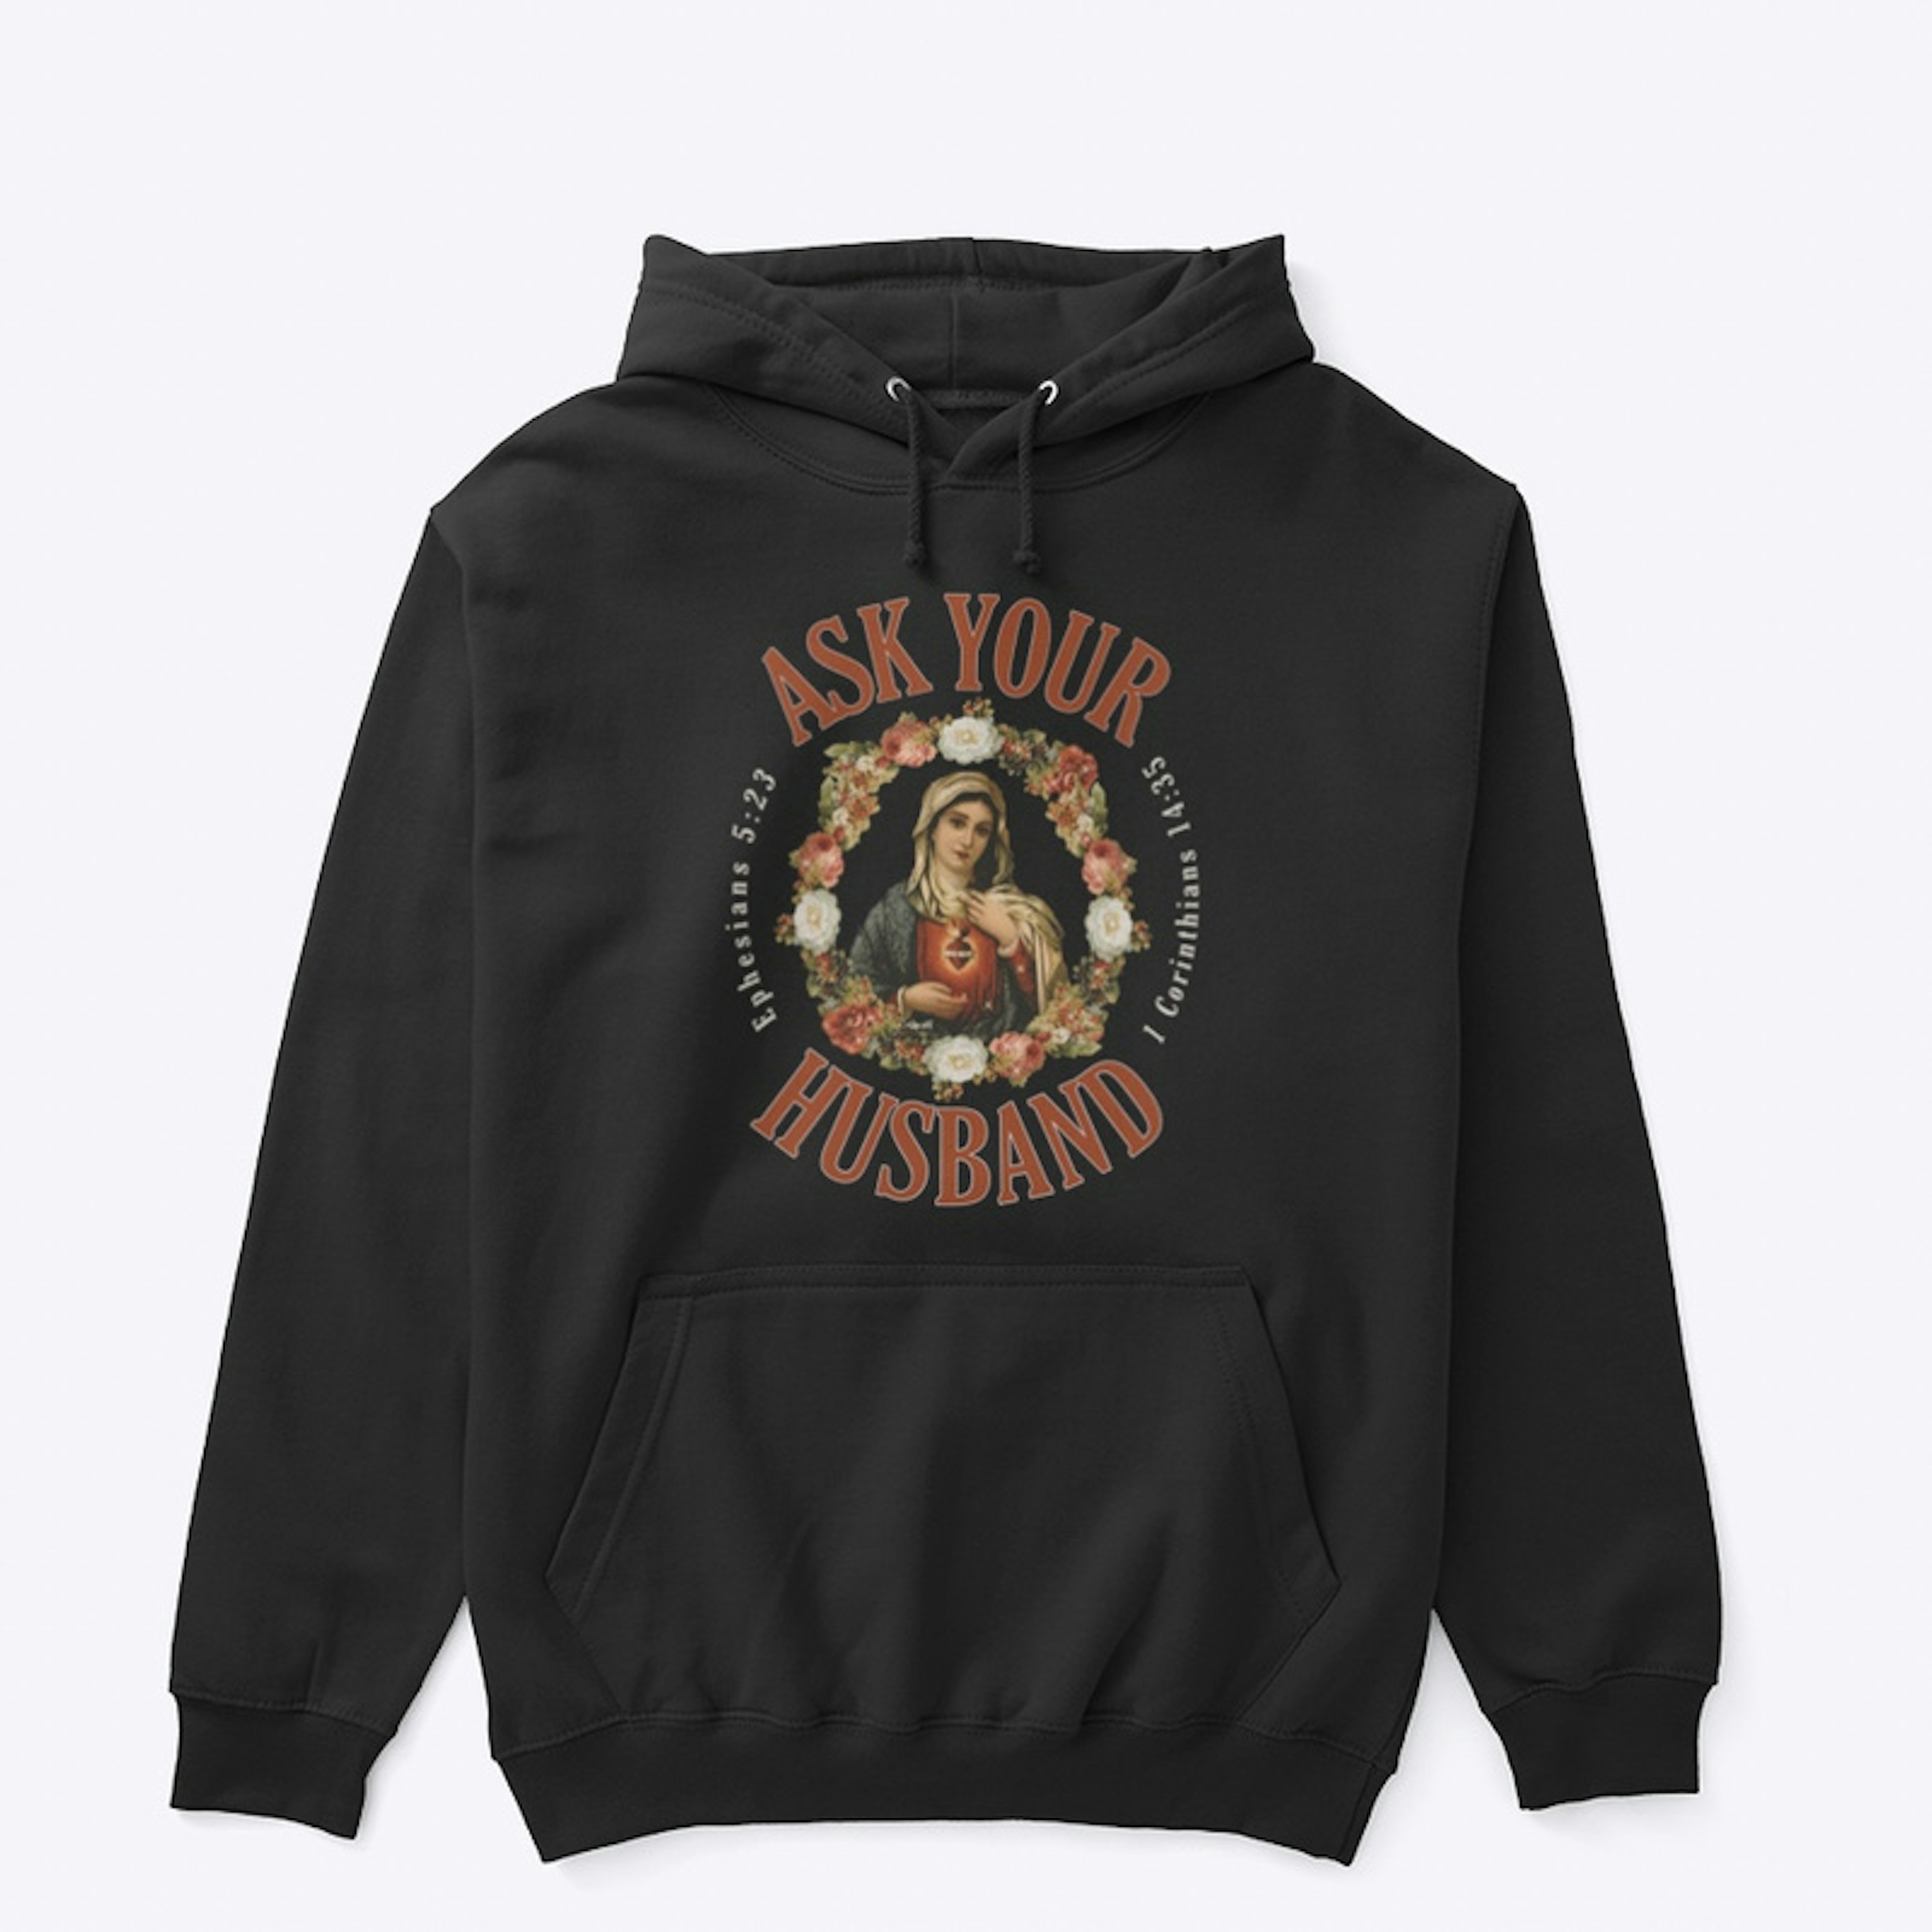 Ask Your Husband Hoodie